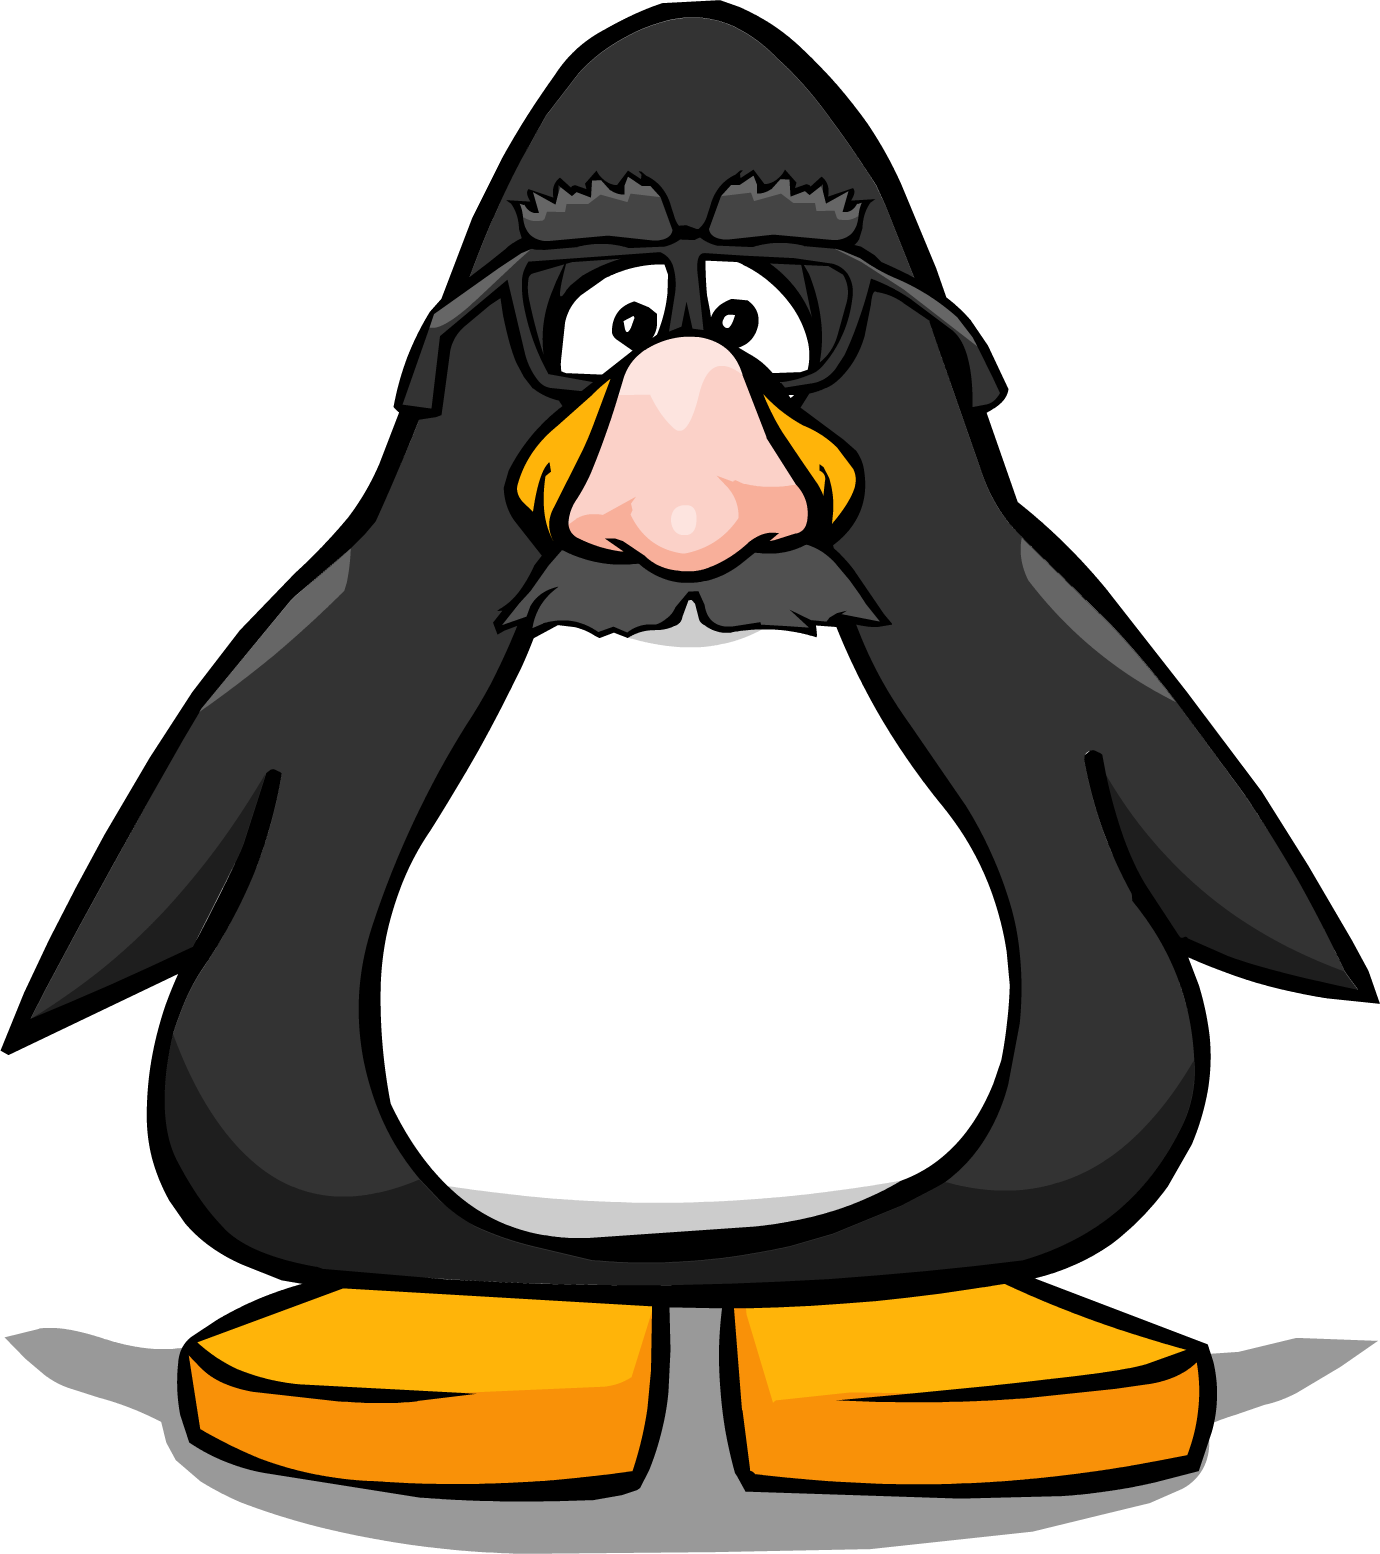 Funny-face Glasses From A Player Card - Club Penguin Tour Guide Hat (1380x1554)